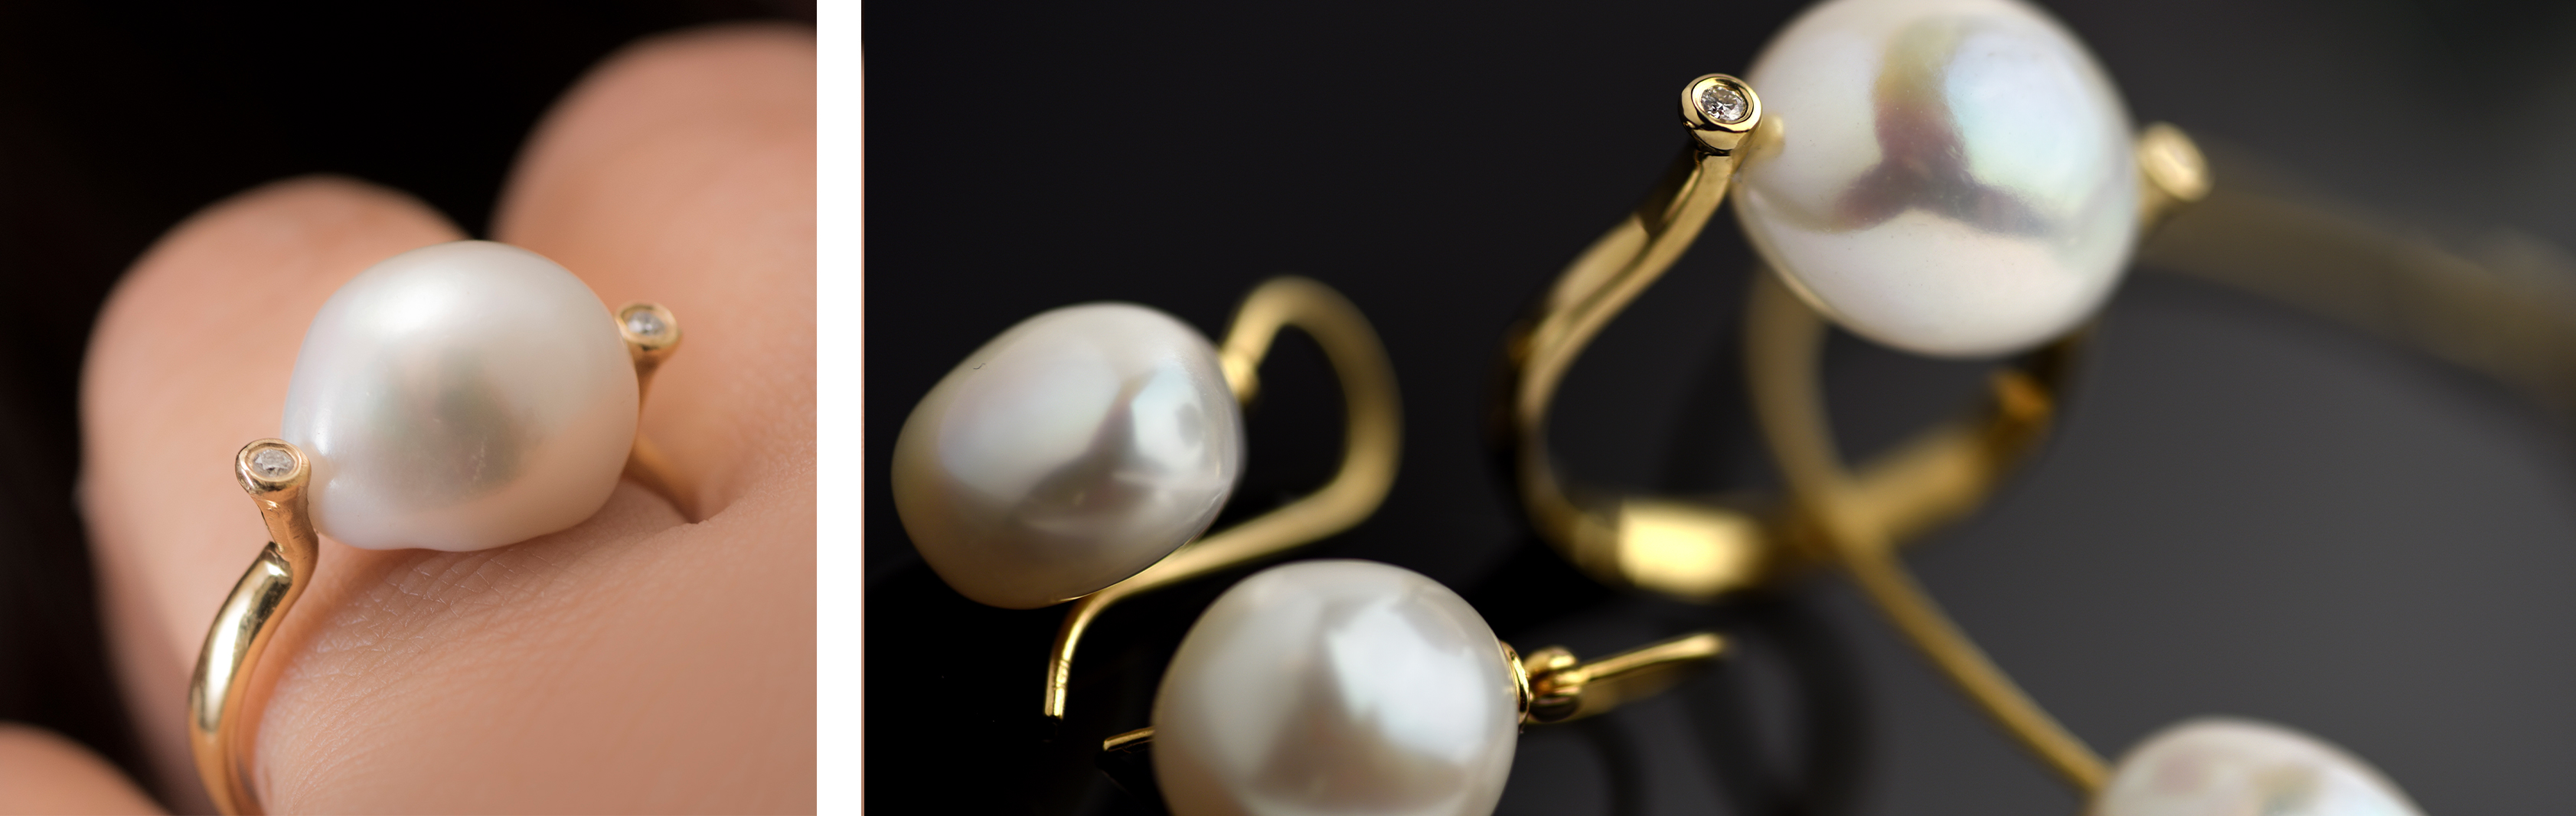 Exquisite Pearls Collection | 14K Gold Jewelry with Pearls and Diamonds